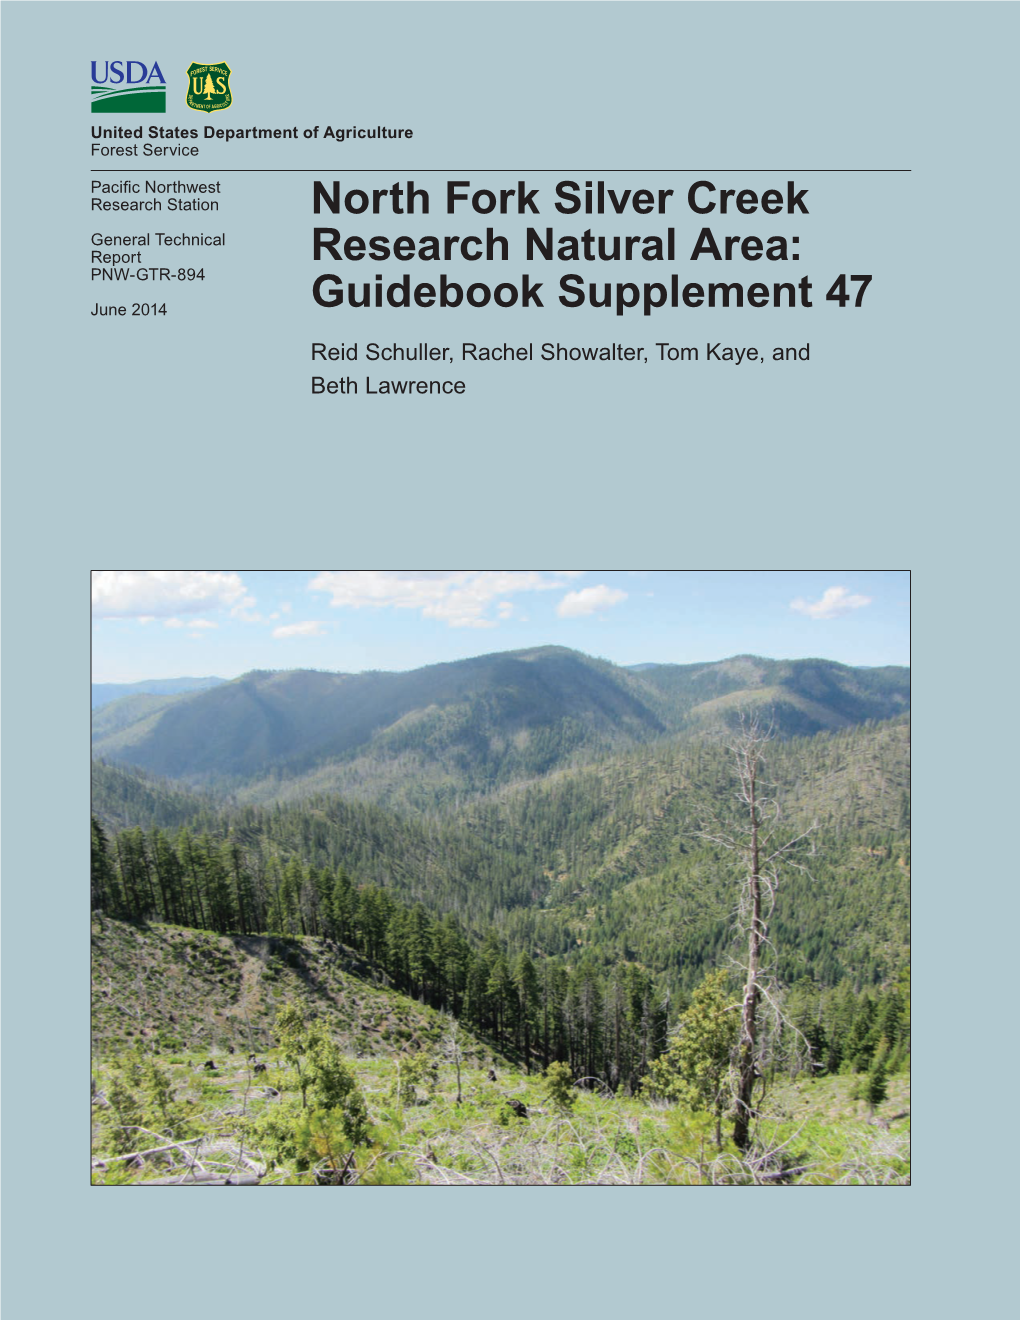 North Fork Silver Creek Research Natural Area (RNA)